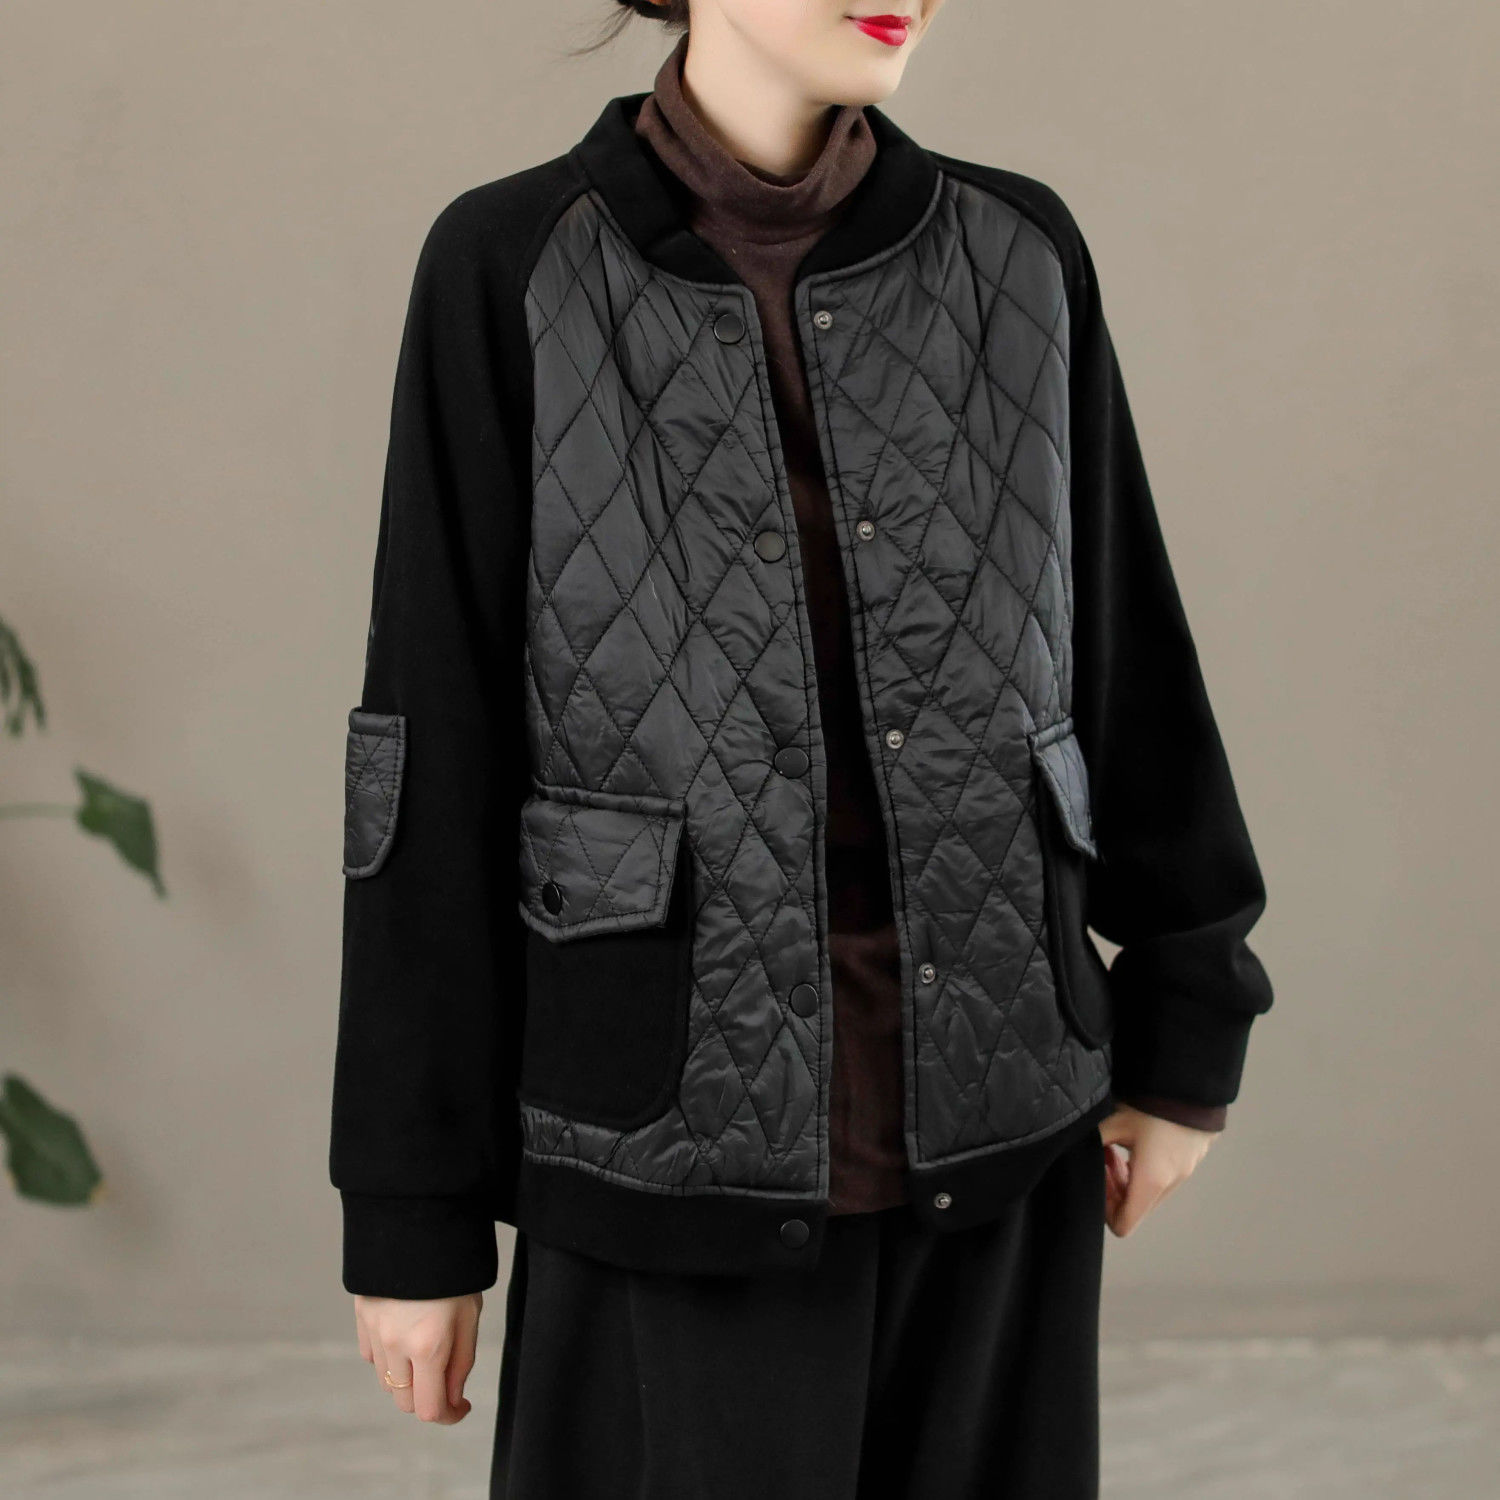 Autumn and winter thickened quilted diamond splicing thin cotton women's jacket Korean style loose design casual jacket baseball uniform